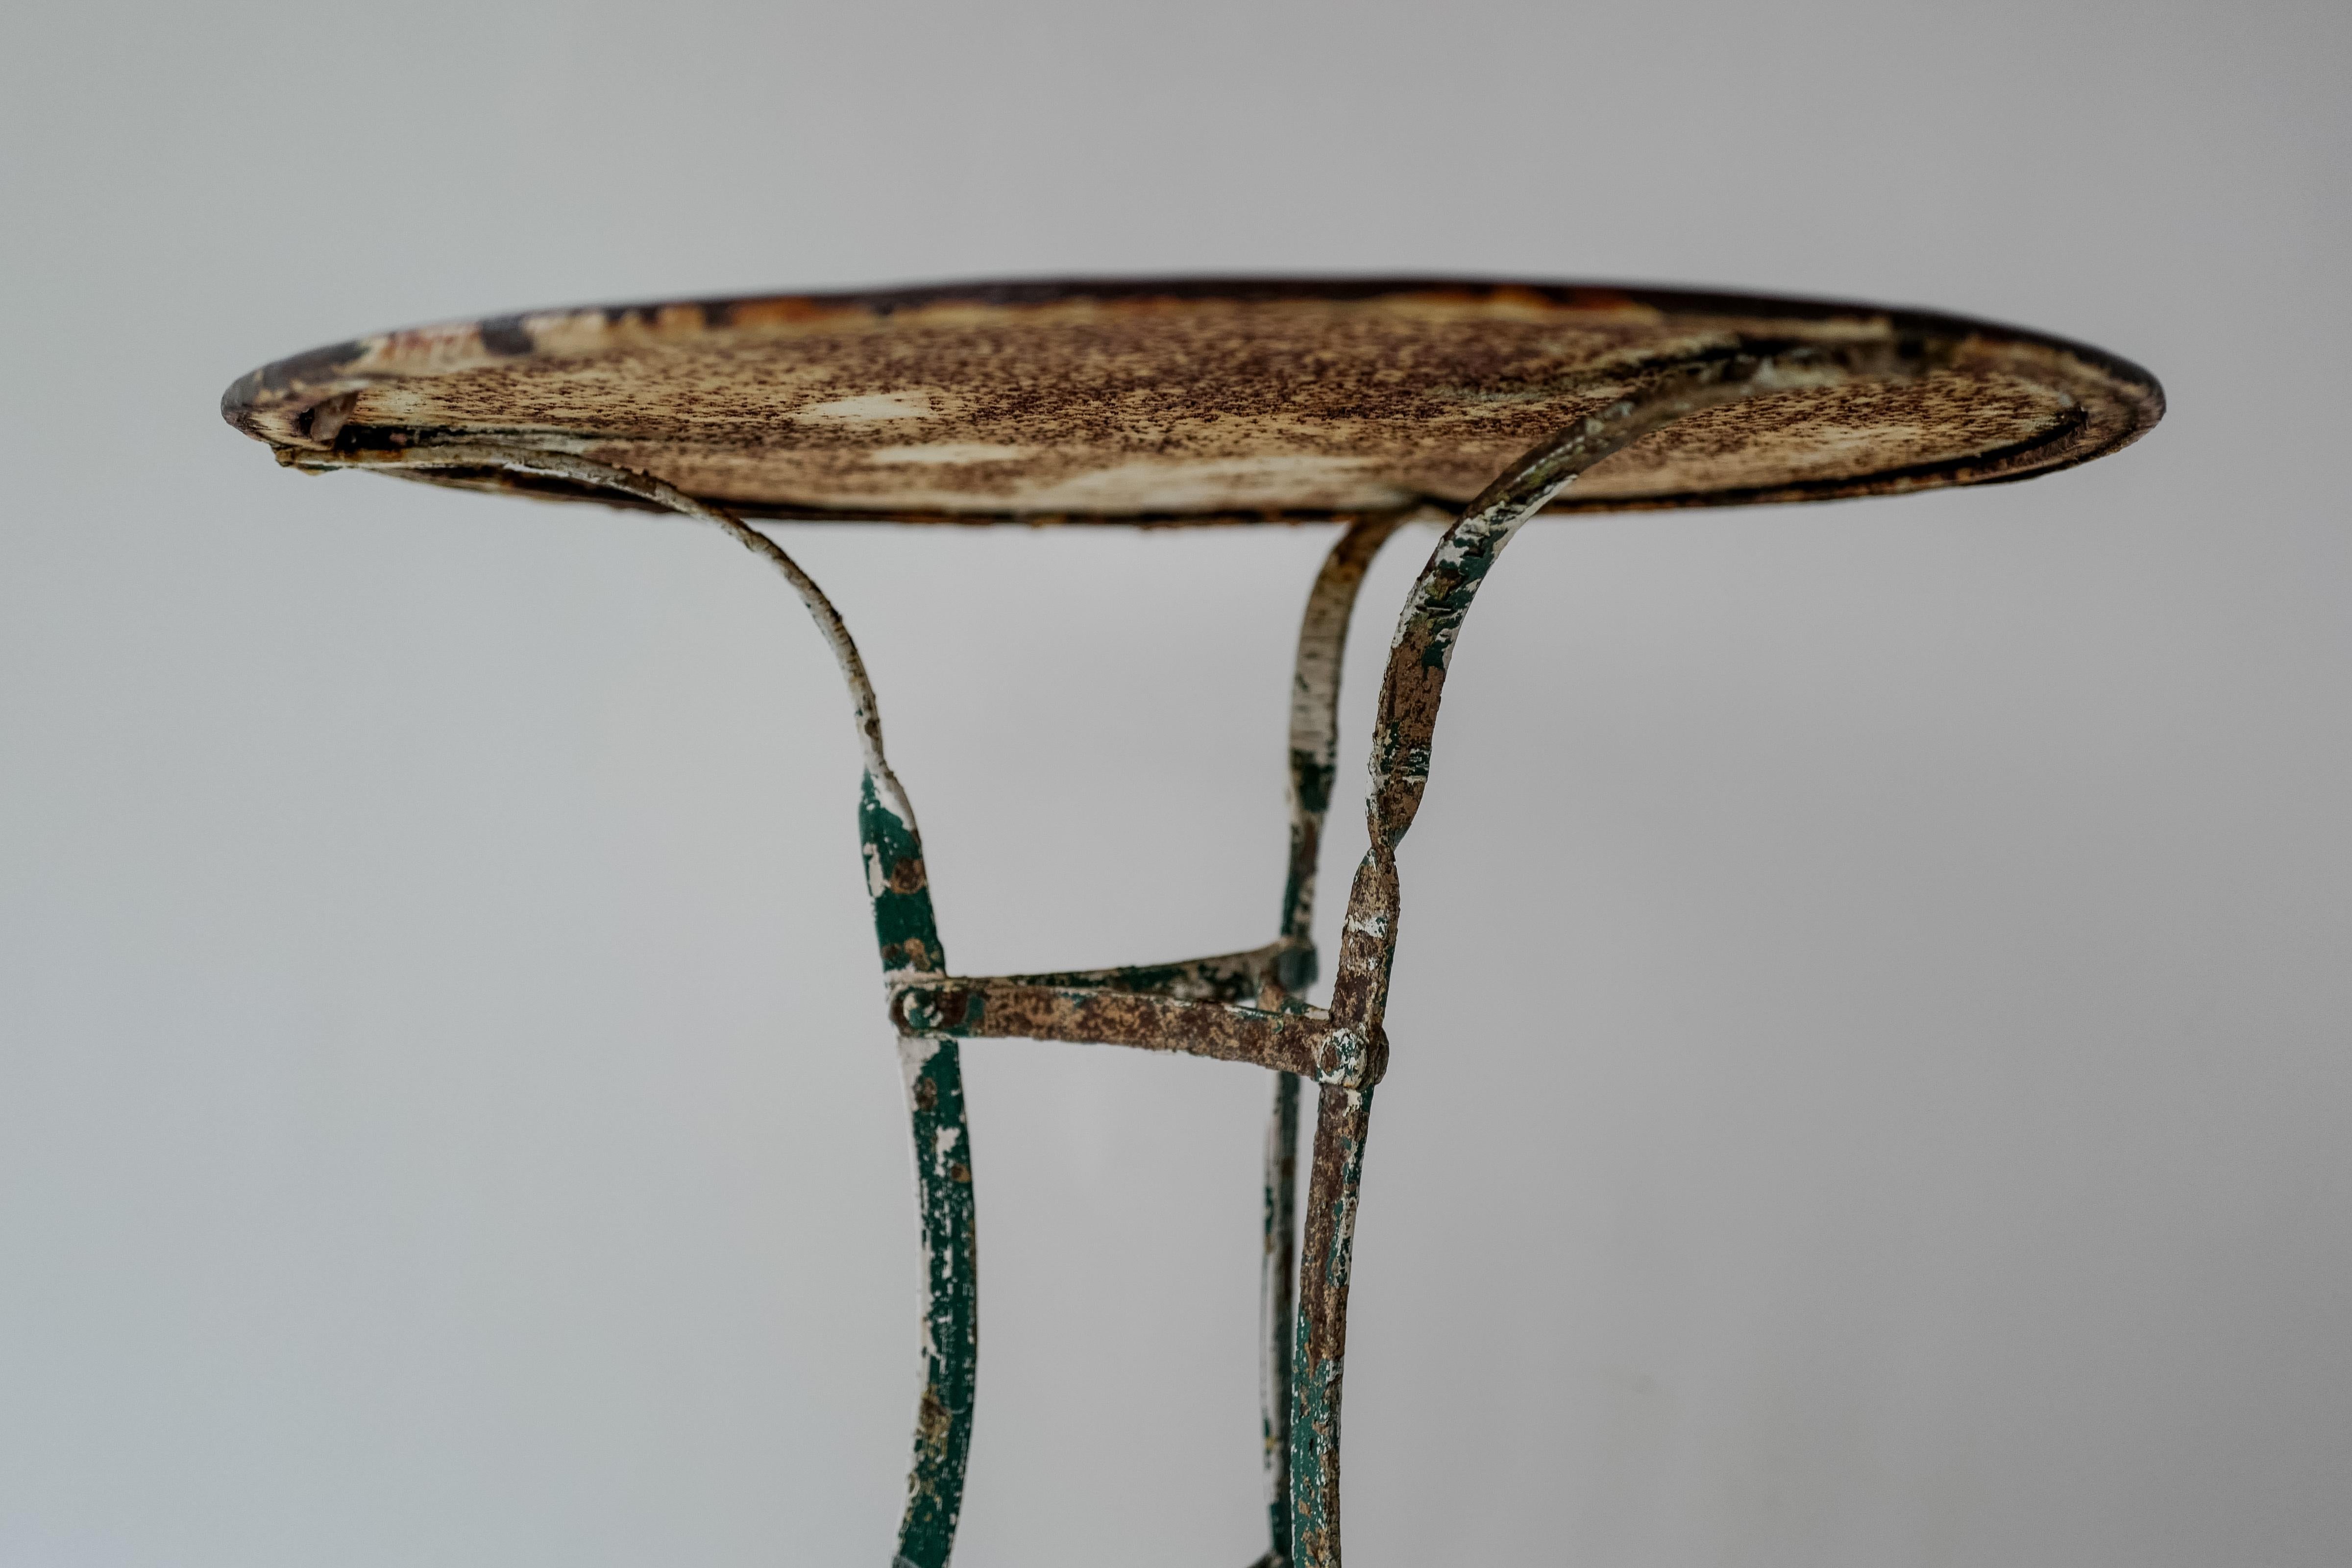 19th Century Italian Firenze Iron Round Bistro Table or Garden Table with dark brown/green patina. Beautiful time worn patina. 